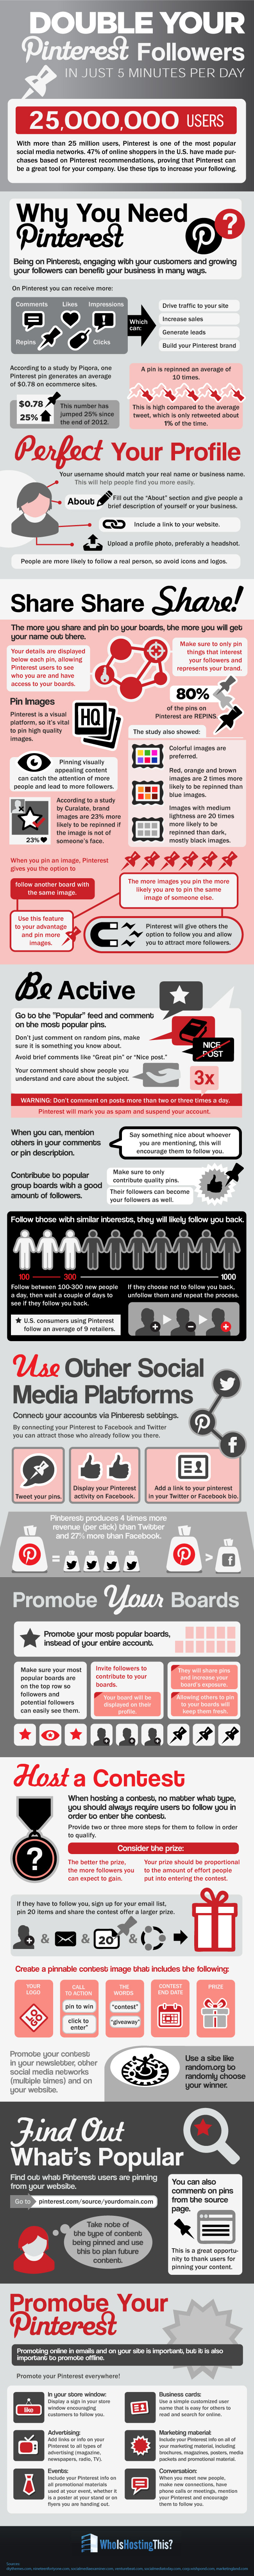 Double Your Pinterest Followers In Just 5 Minutes a Day [Infographic]